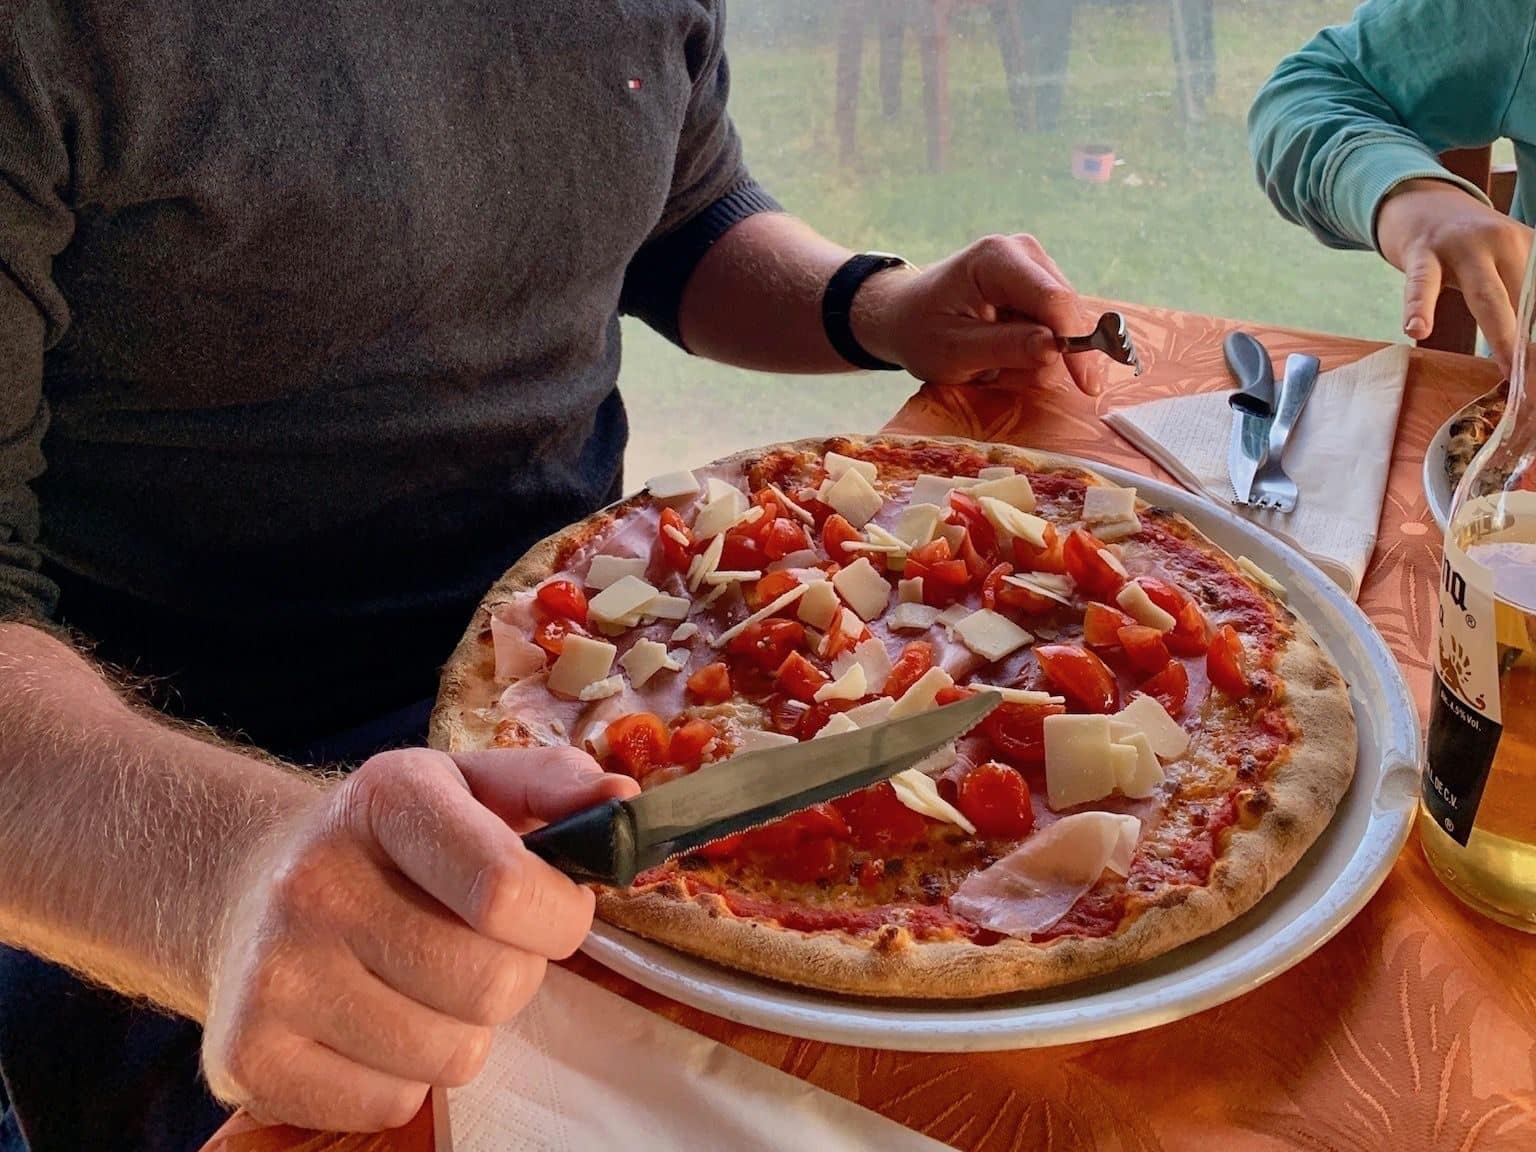 A picture speaks volumes: In Sardinia there is excellent pizza on every corner. Photo: Luisa Praetorius